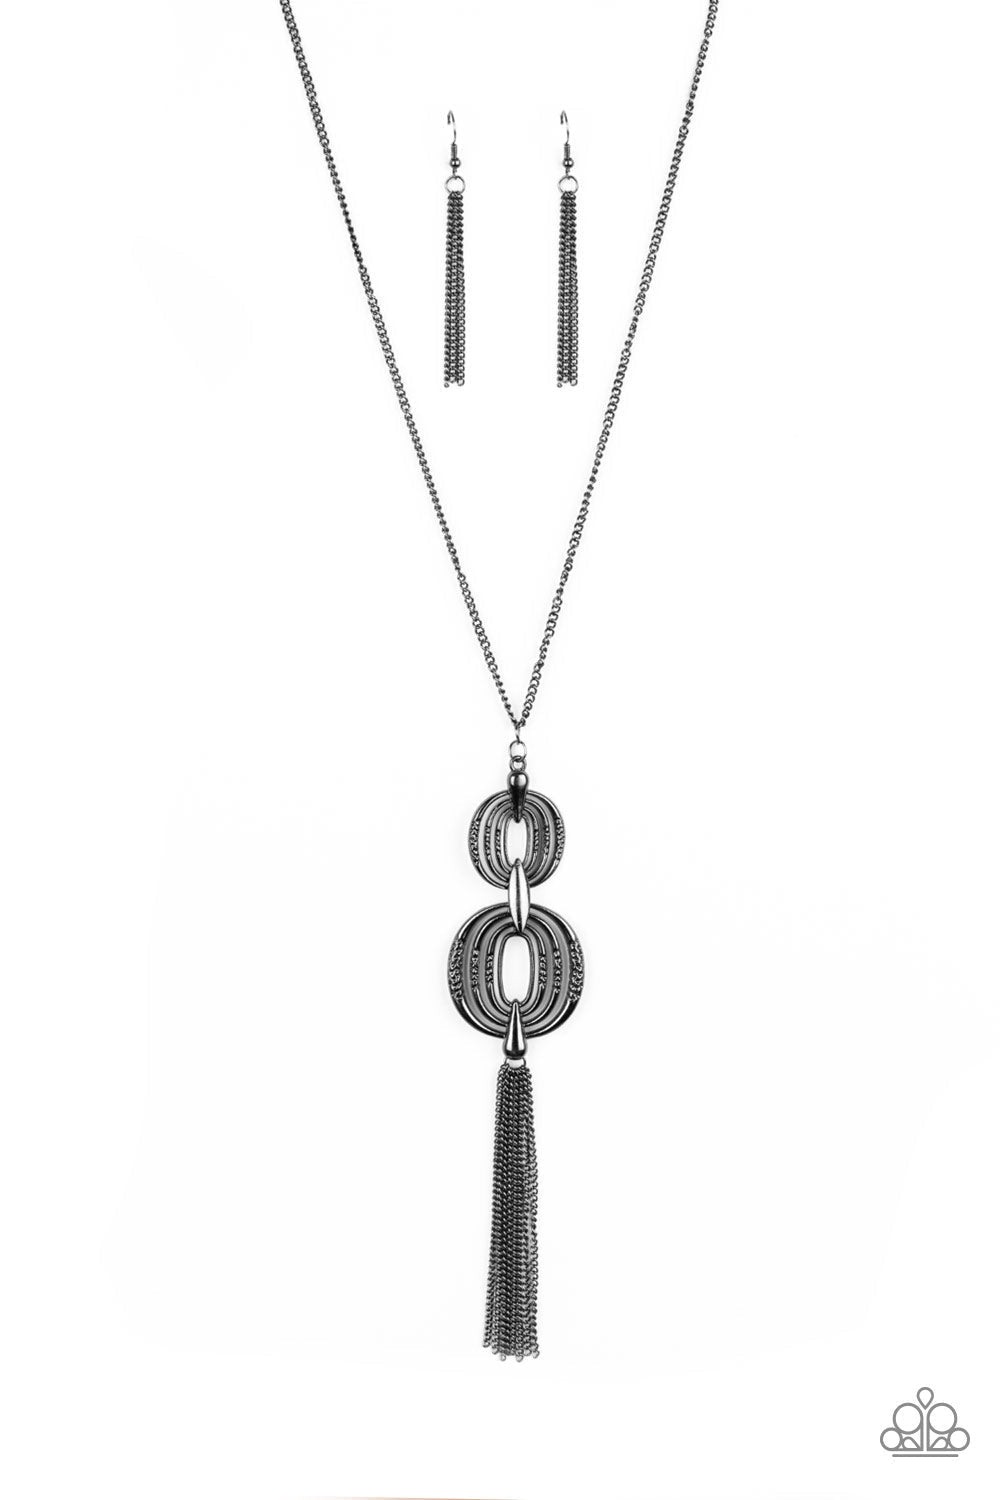 Timelessly Tasseled - Black Necklace - Paparazzi Accessories - Delicately hammered in sections of shimmer, gunmetal circular frames stack into a bold pendant at the bottom of a lengthened gunmetal chain. A shimmery gunmetal tassel swings from the bottom of the stacked pendant for a casual finish. Features an adjustable clasp closure.